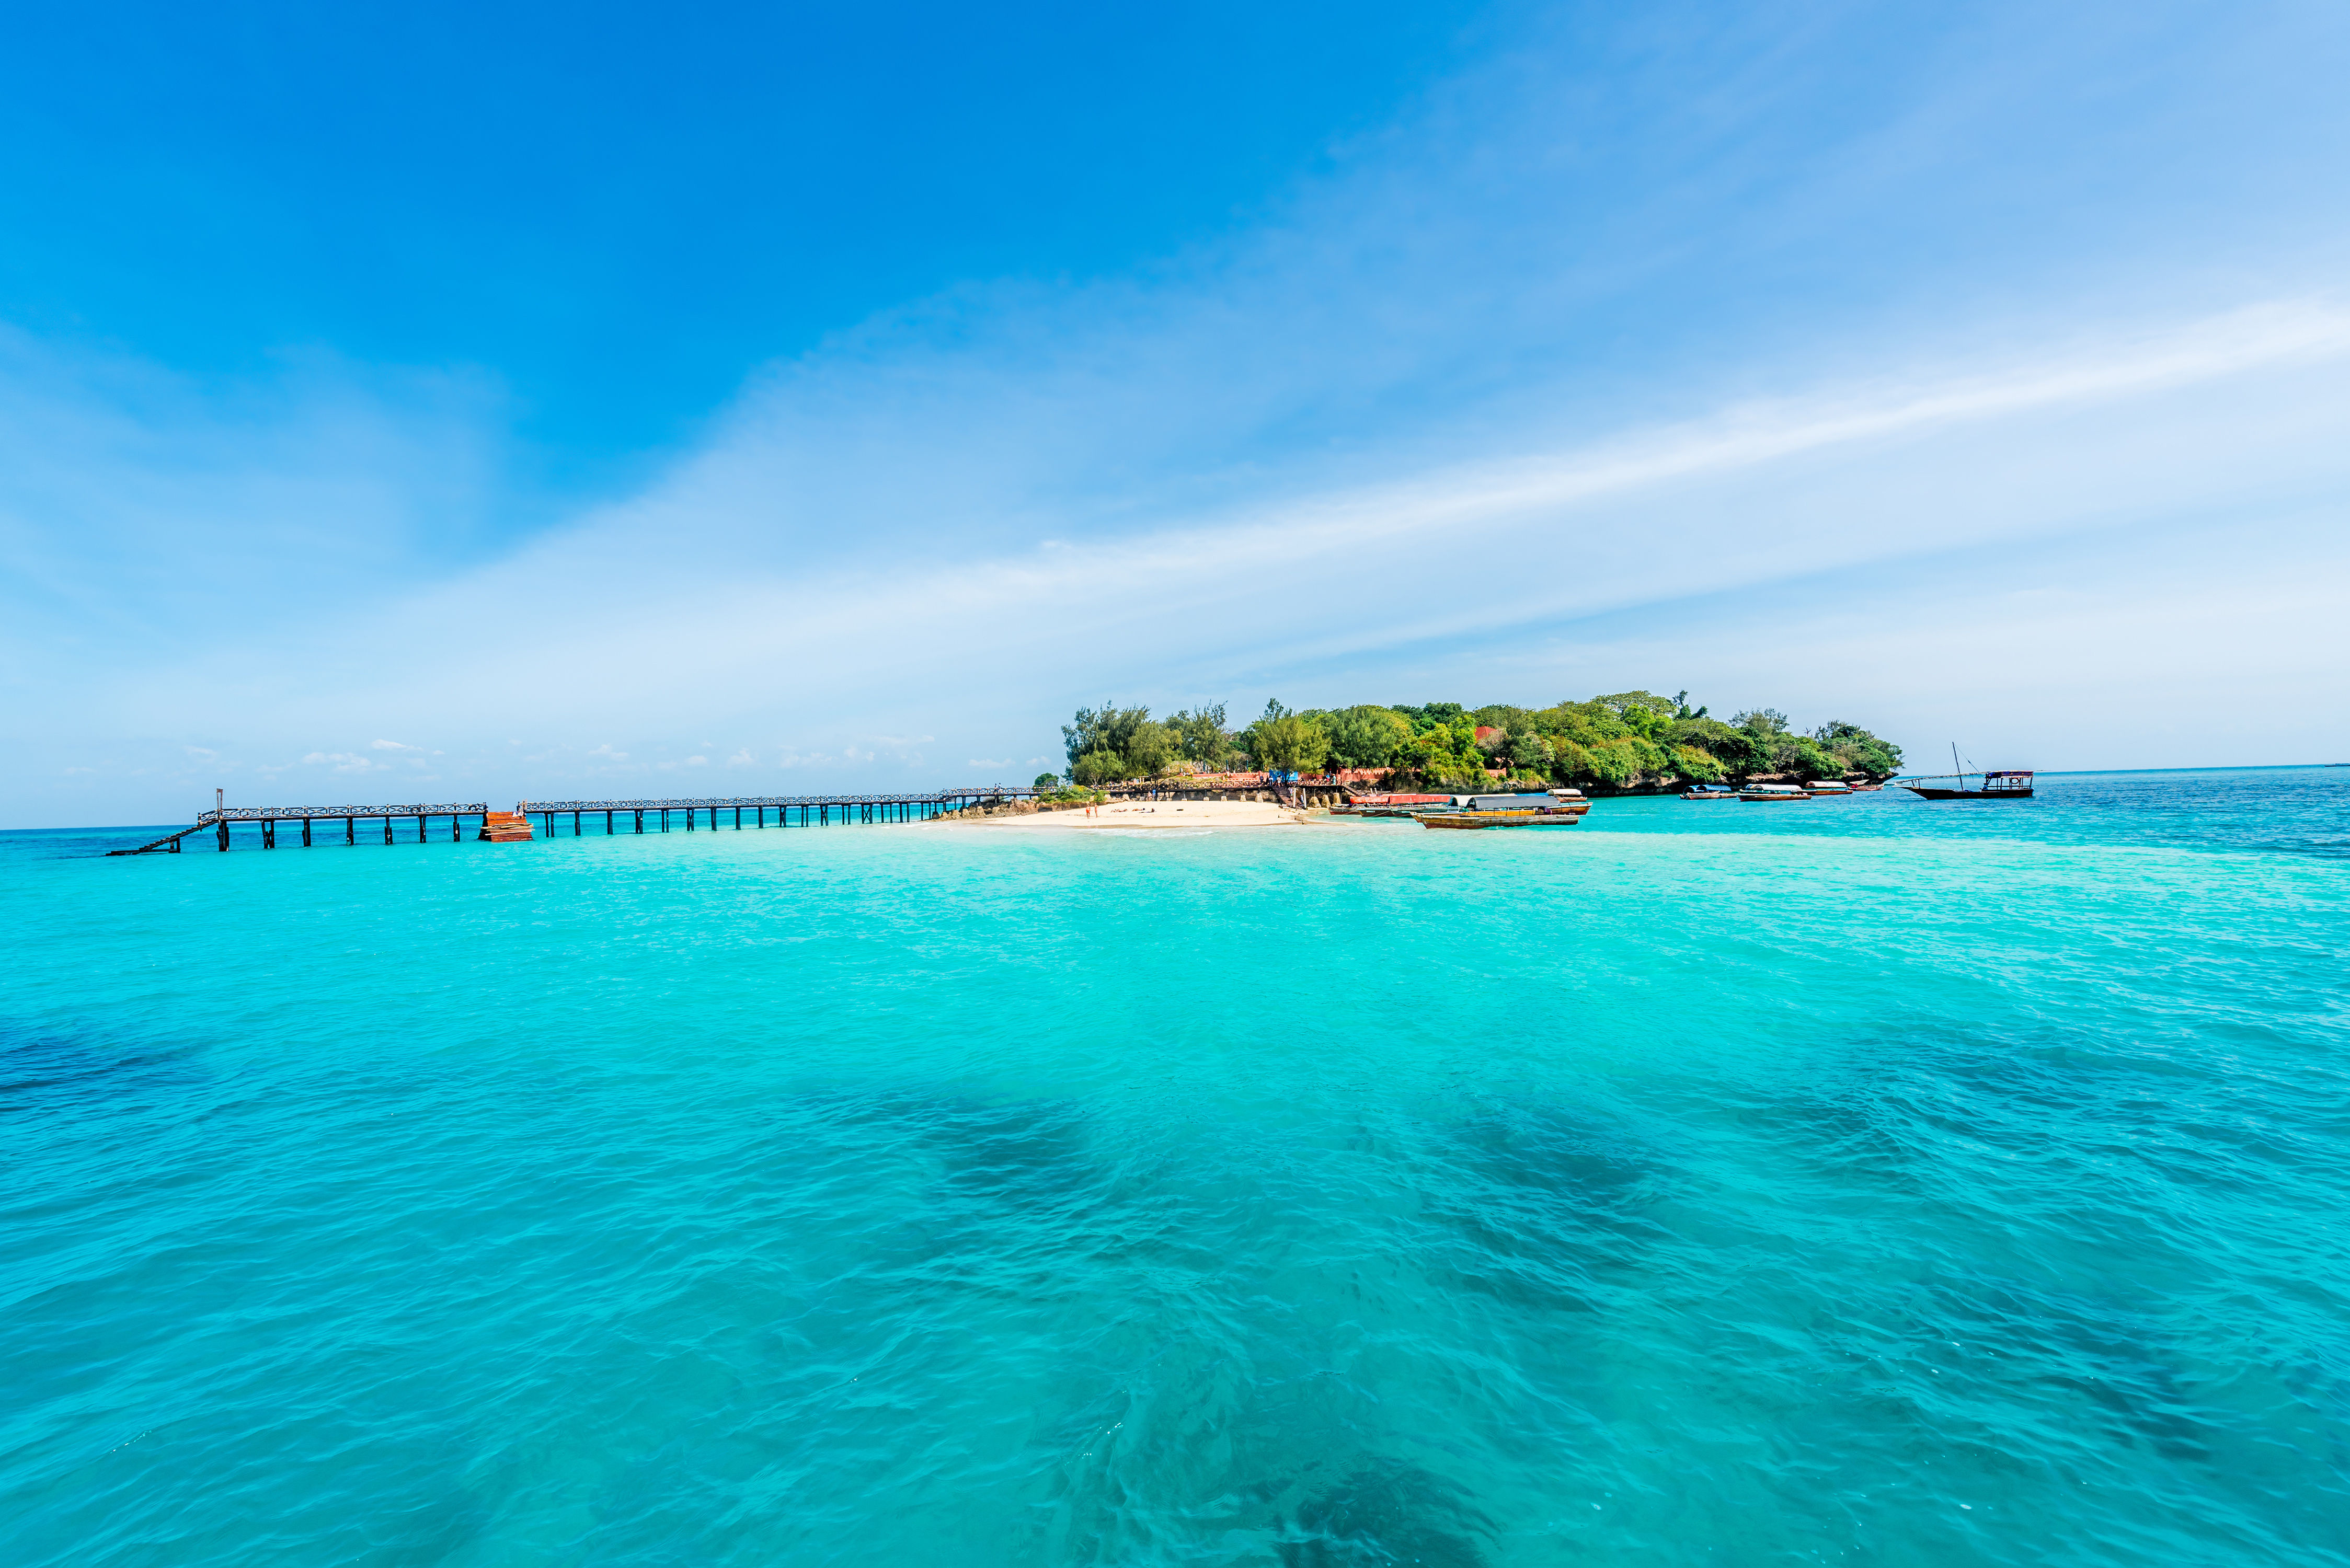 Small tropical island with wooden jetty, surrounded by turquoise waters and clear blue skies off Madagascar. 